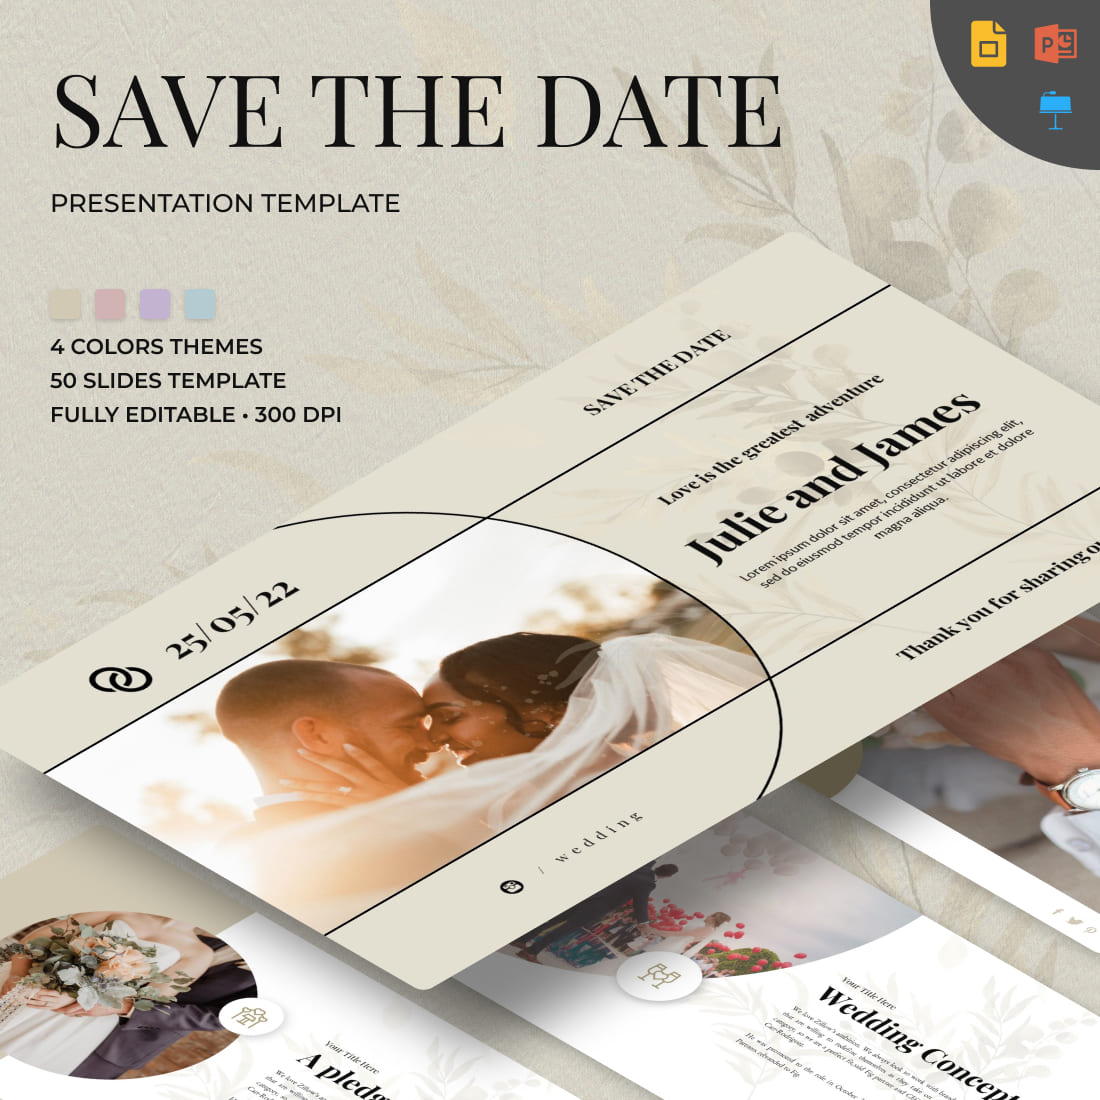 Save the Date Wedding Presentation Template.